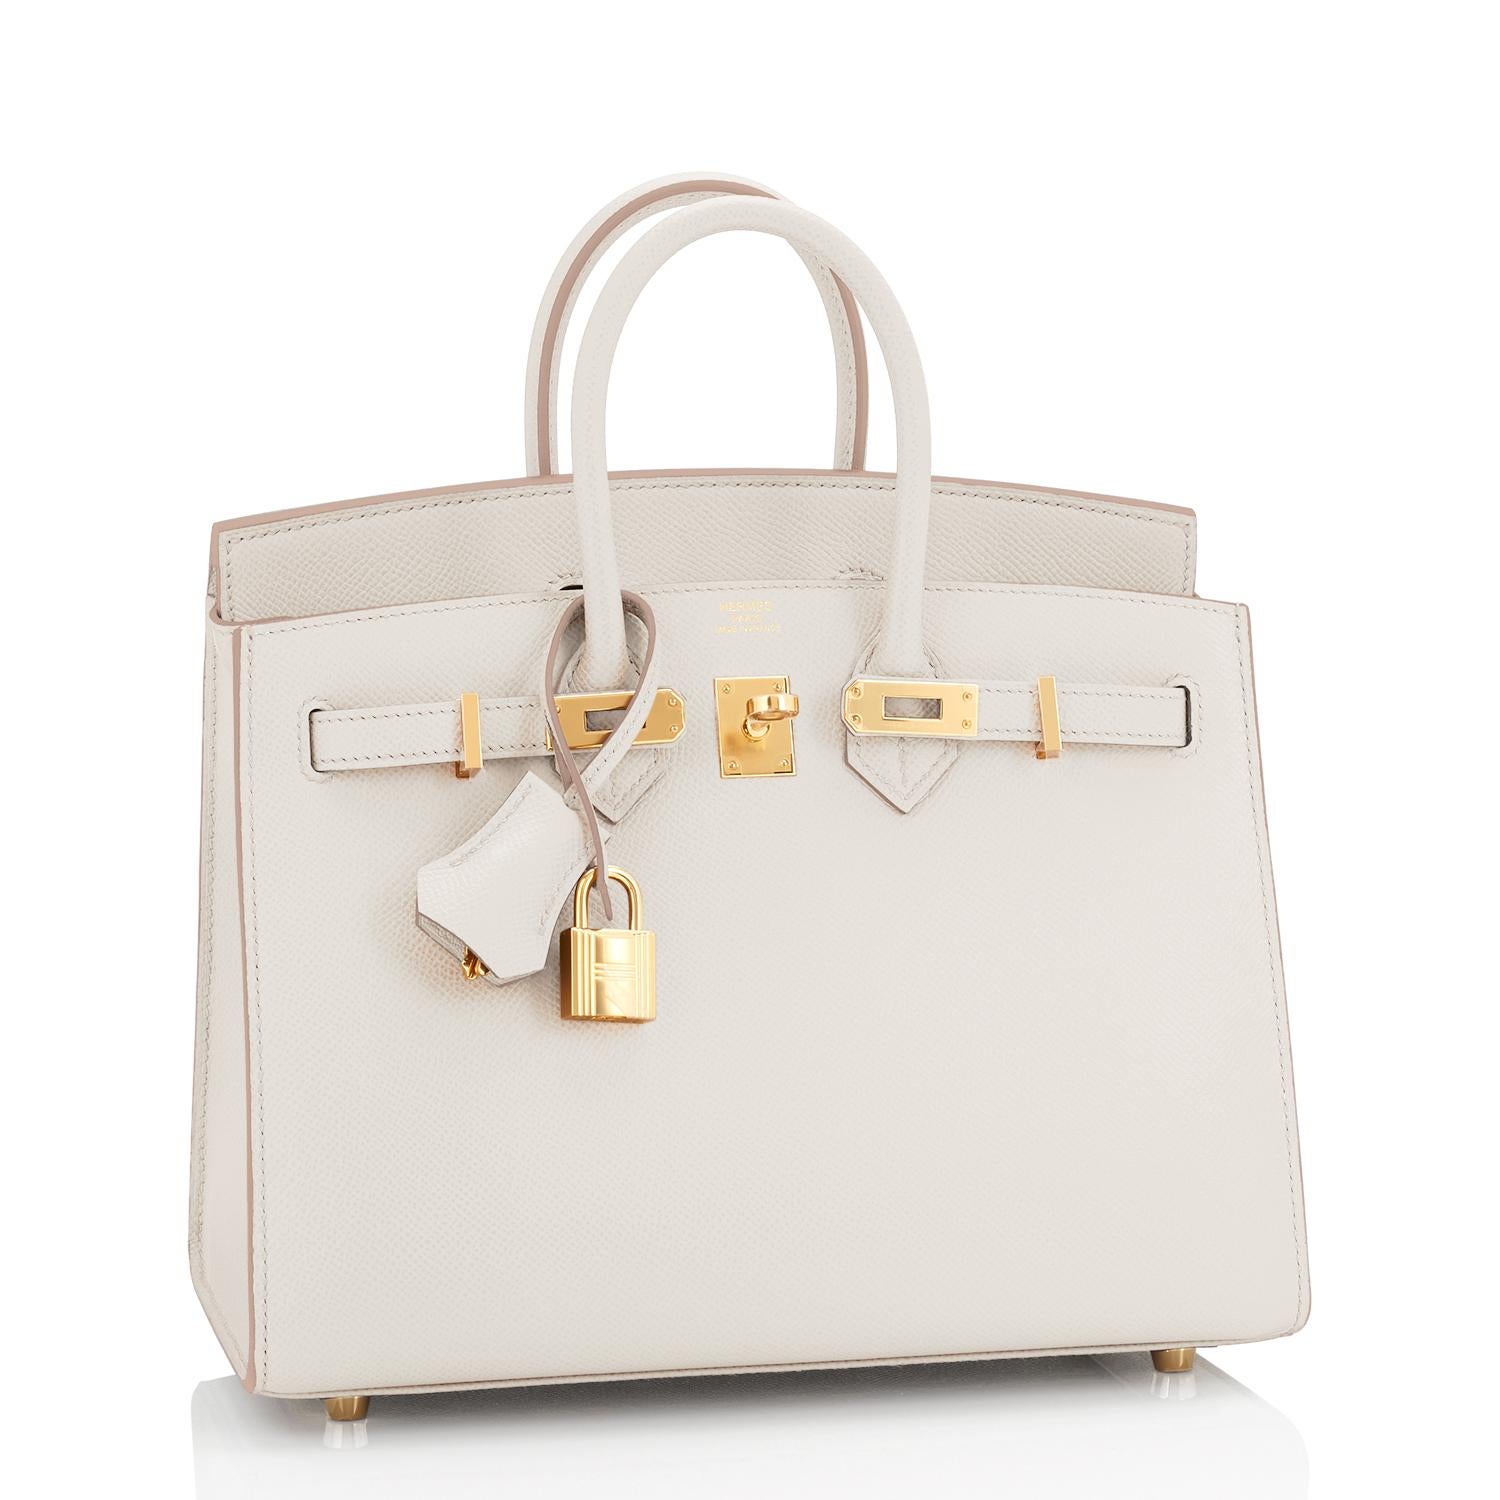 Hermes Birkin 25cm Sellier Craie Off White Cream Epsom Gold U Stamp, 2022 
Do not miss this perfect little jewel - the only Birkin you need day and night, all four seasons!
Just purchased from Hermes store; bag bears new 2022 interior U Stamp.
Brand